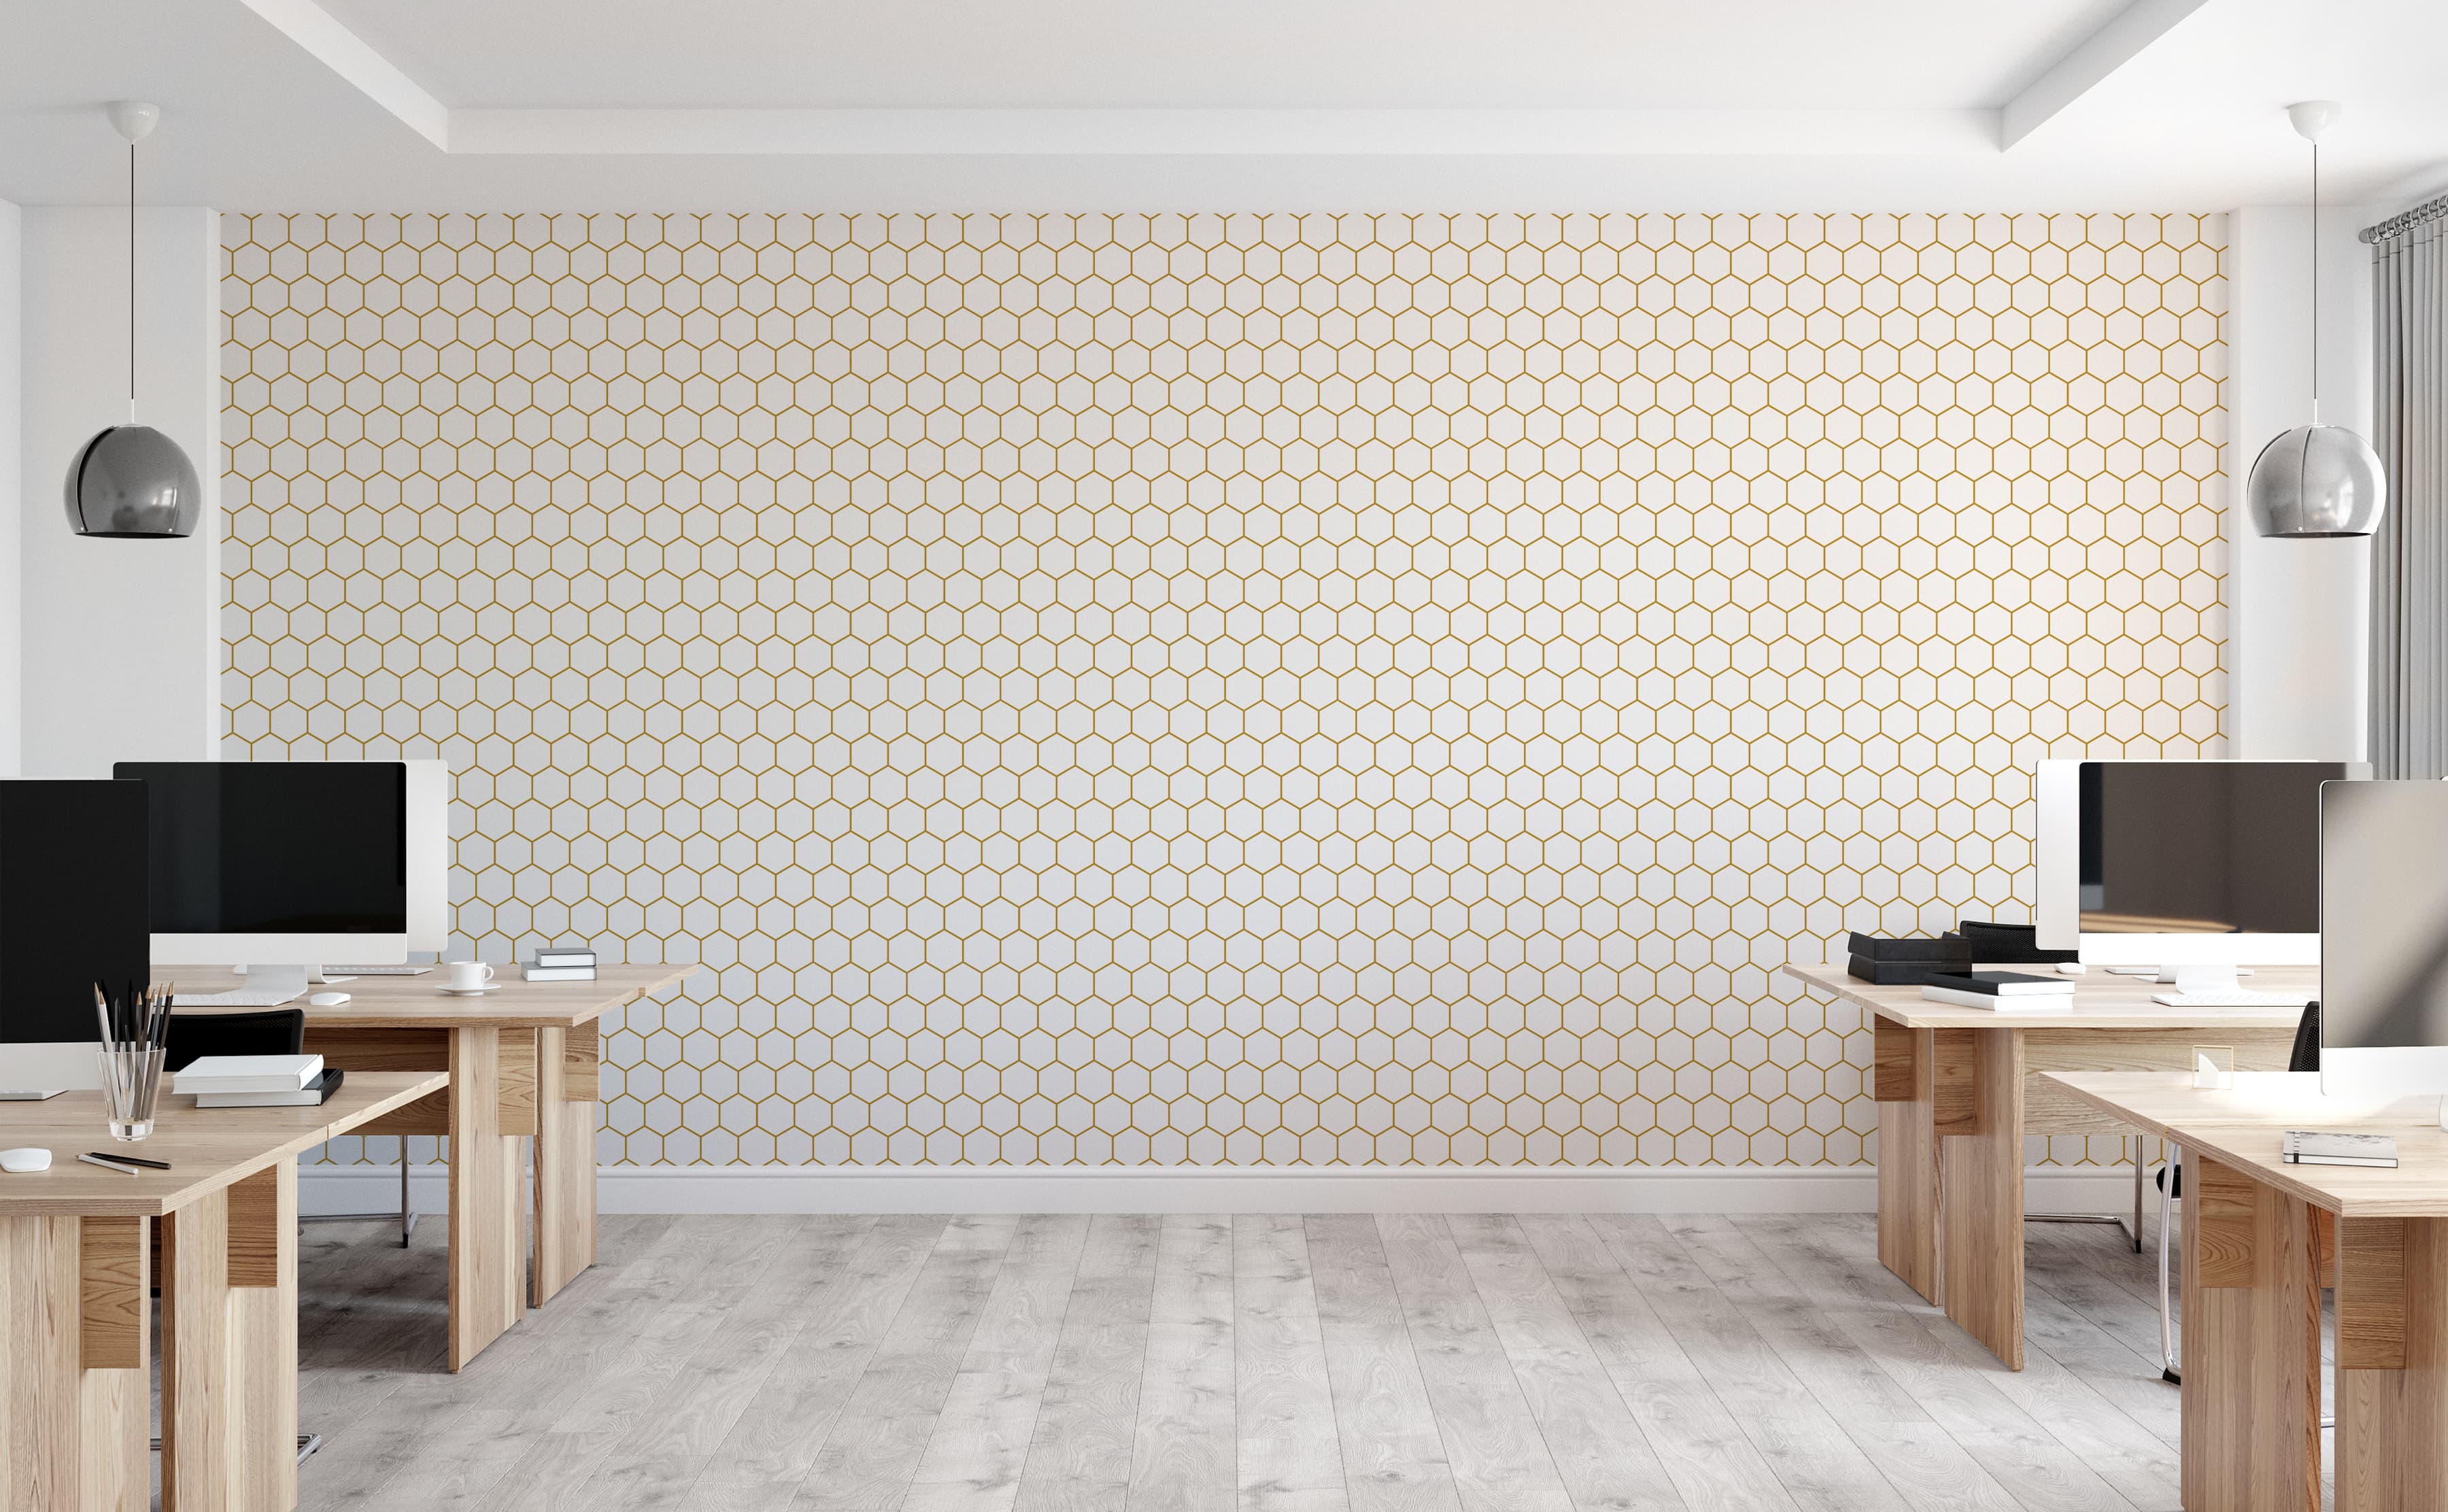 Hexagon Wall Paneling Ideas, Honeycomb Decor, Accent Wall Decoration,  Kitchen Wall Decor, Custom Design Wall Paneling, Do It Yourself 